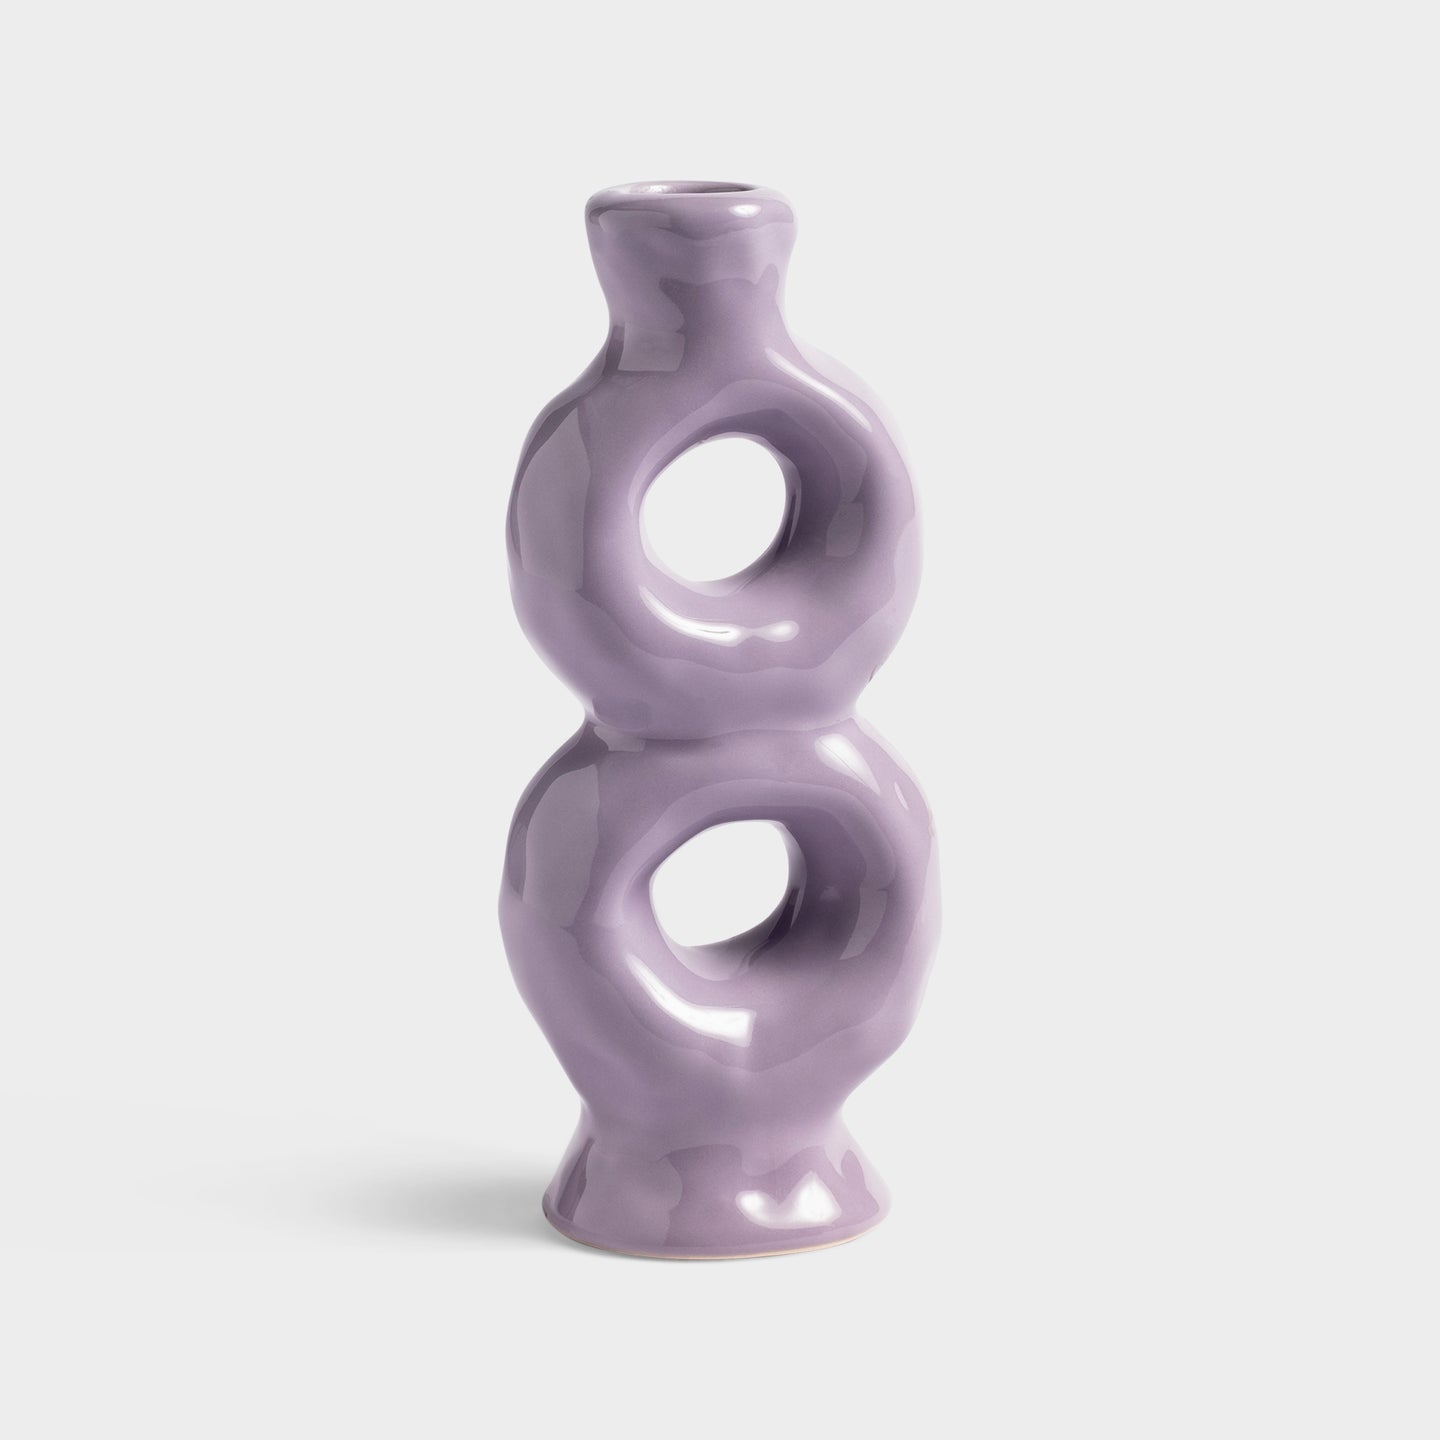 &K Amsterdam - Candle Holder Loop Lilac